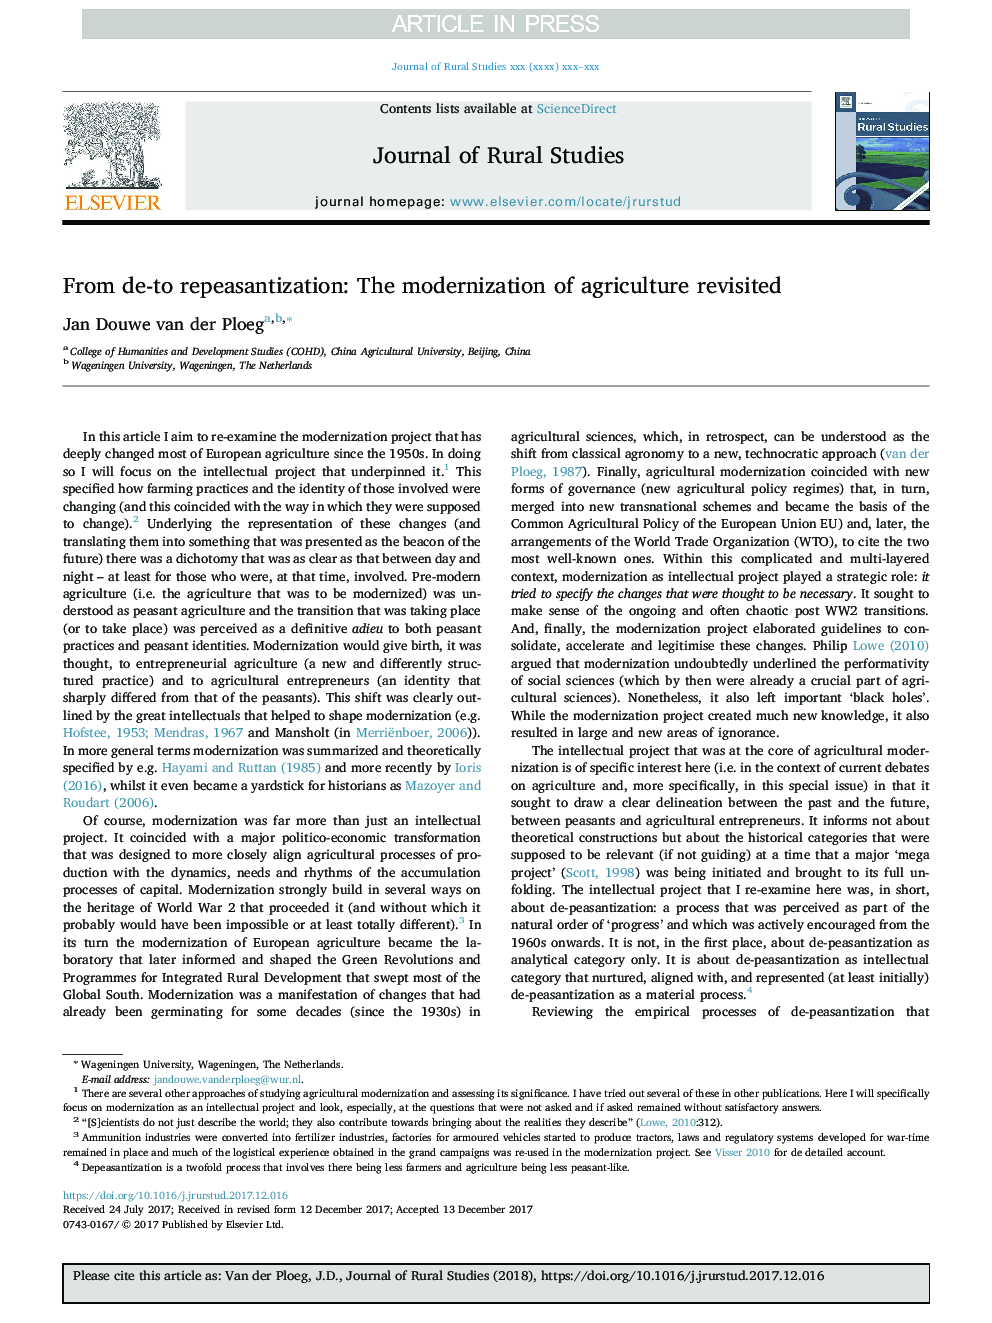 From de-to repeasantization: The modernization of agriculture revisited